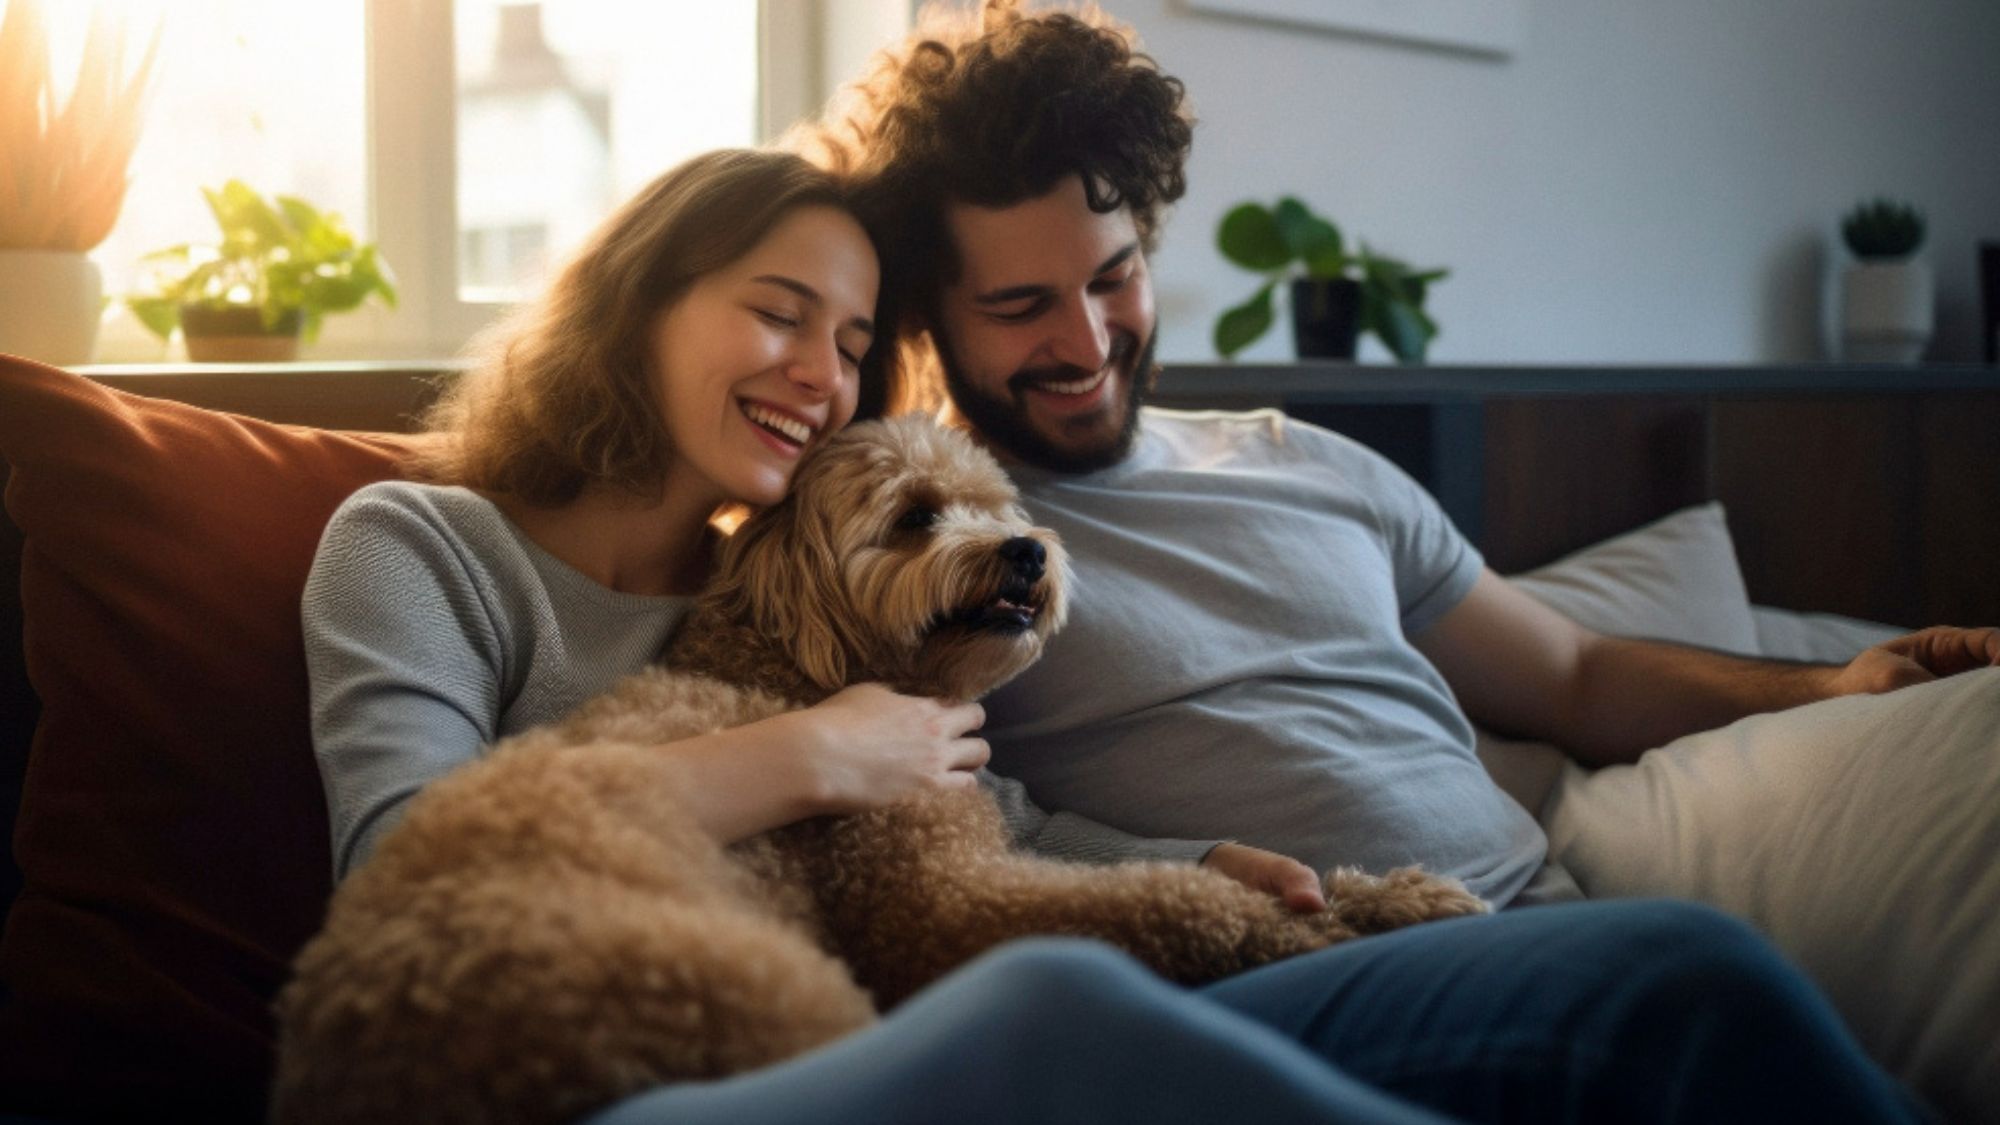 A couple sitting on a couch with their dog, enjoying a cozy moment together in their pet-friendly home